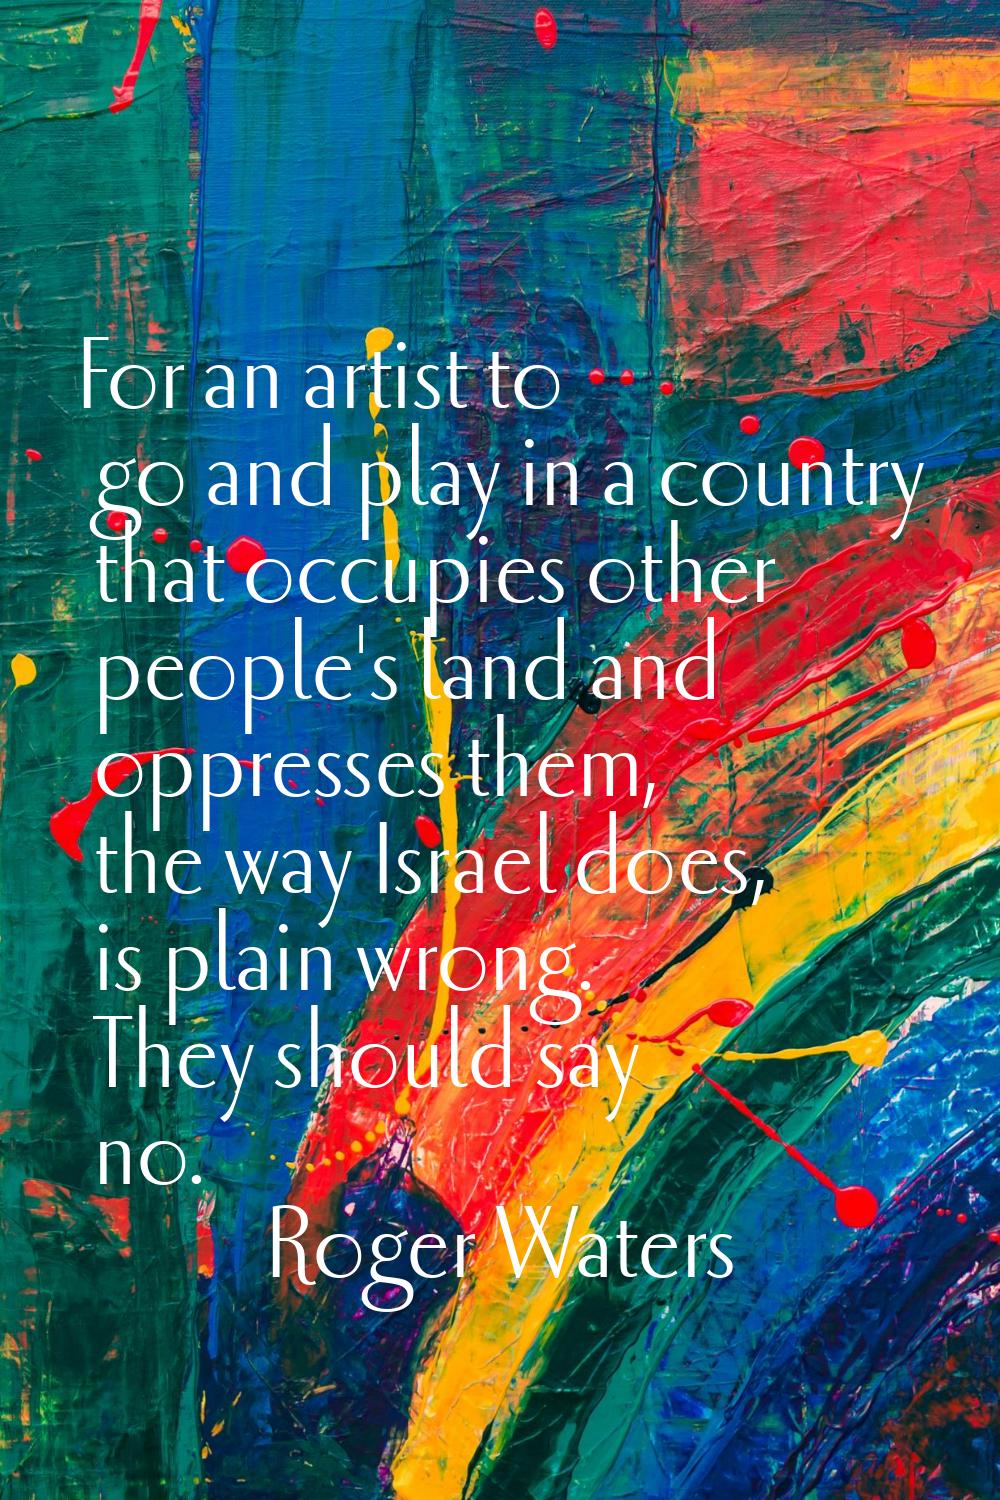 For an artist to go and play in a country that occupies other people's land and oppresses them, the